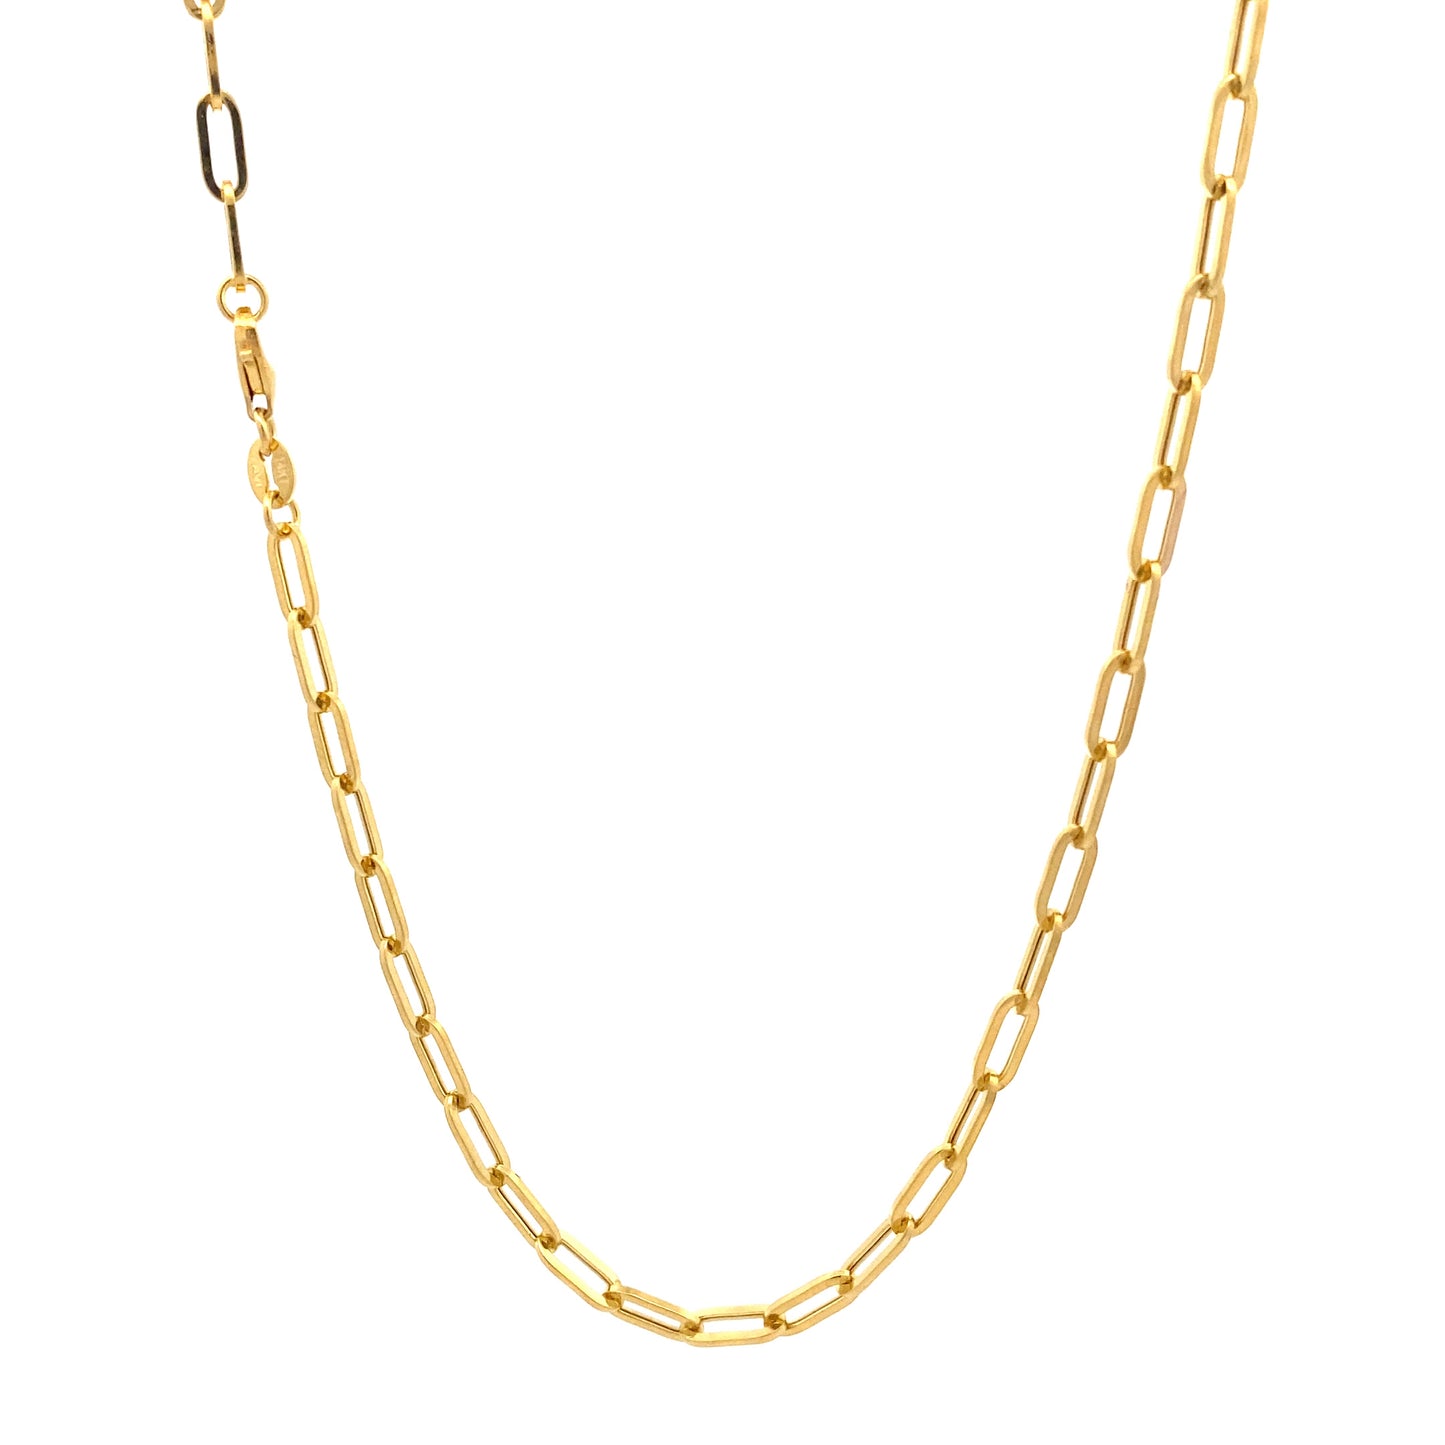 New 14K Yellow Gold Paperclip Chain